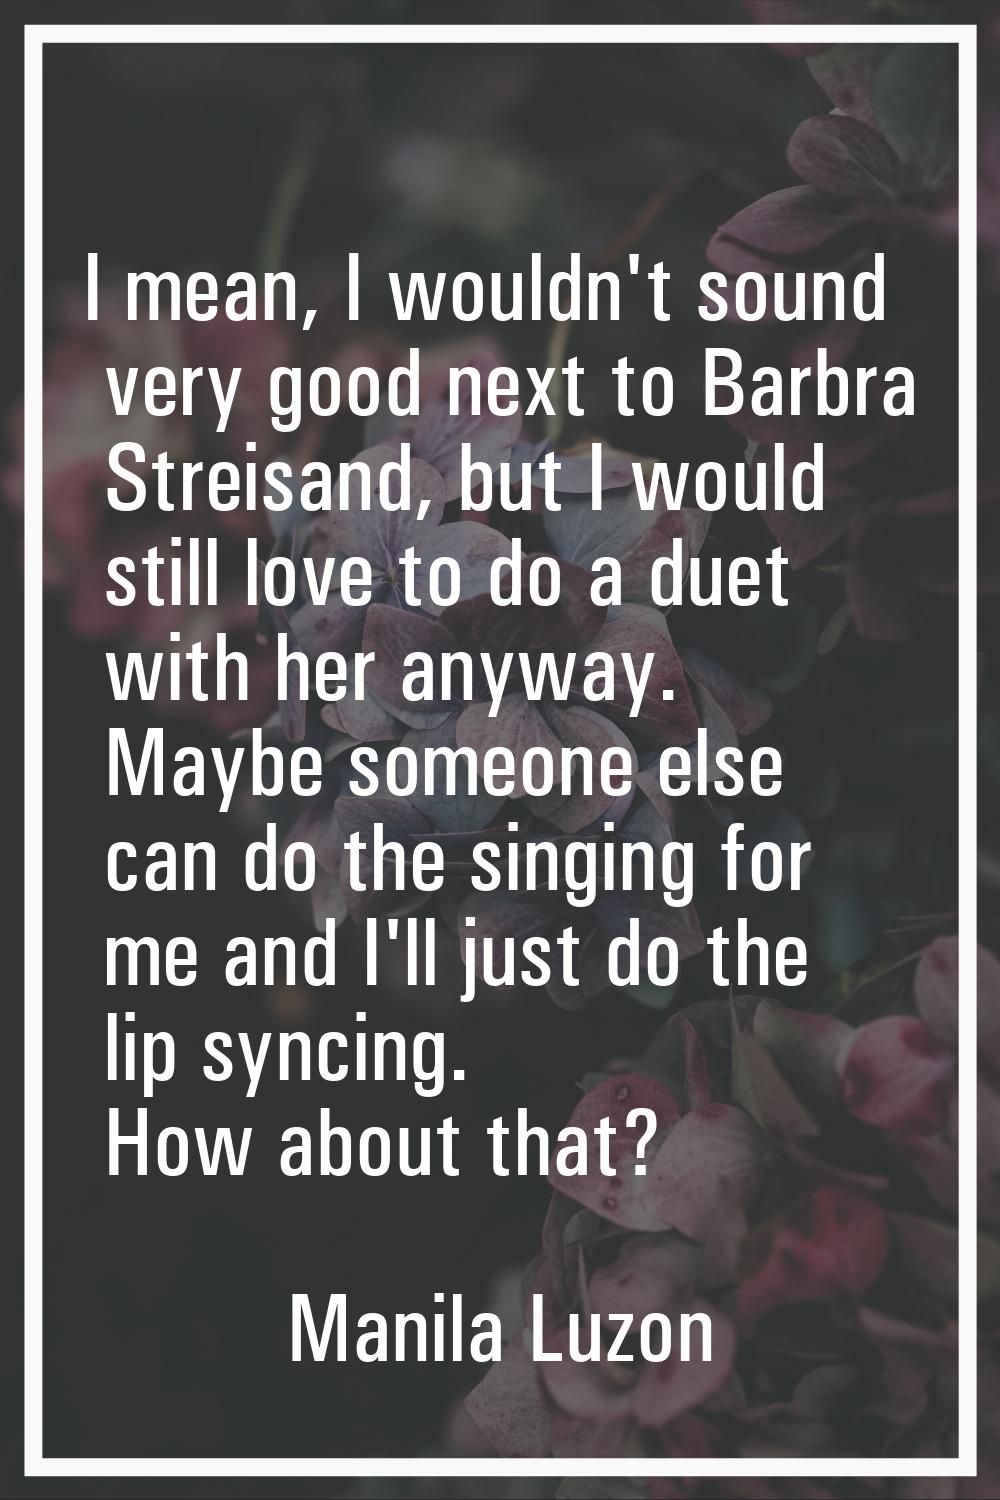 I mean, I wouldn't sound very good next to Barbra Streisand, but I would still love to do a duet wi